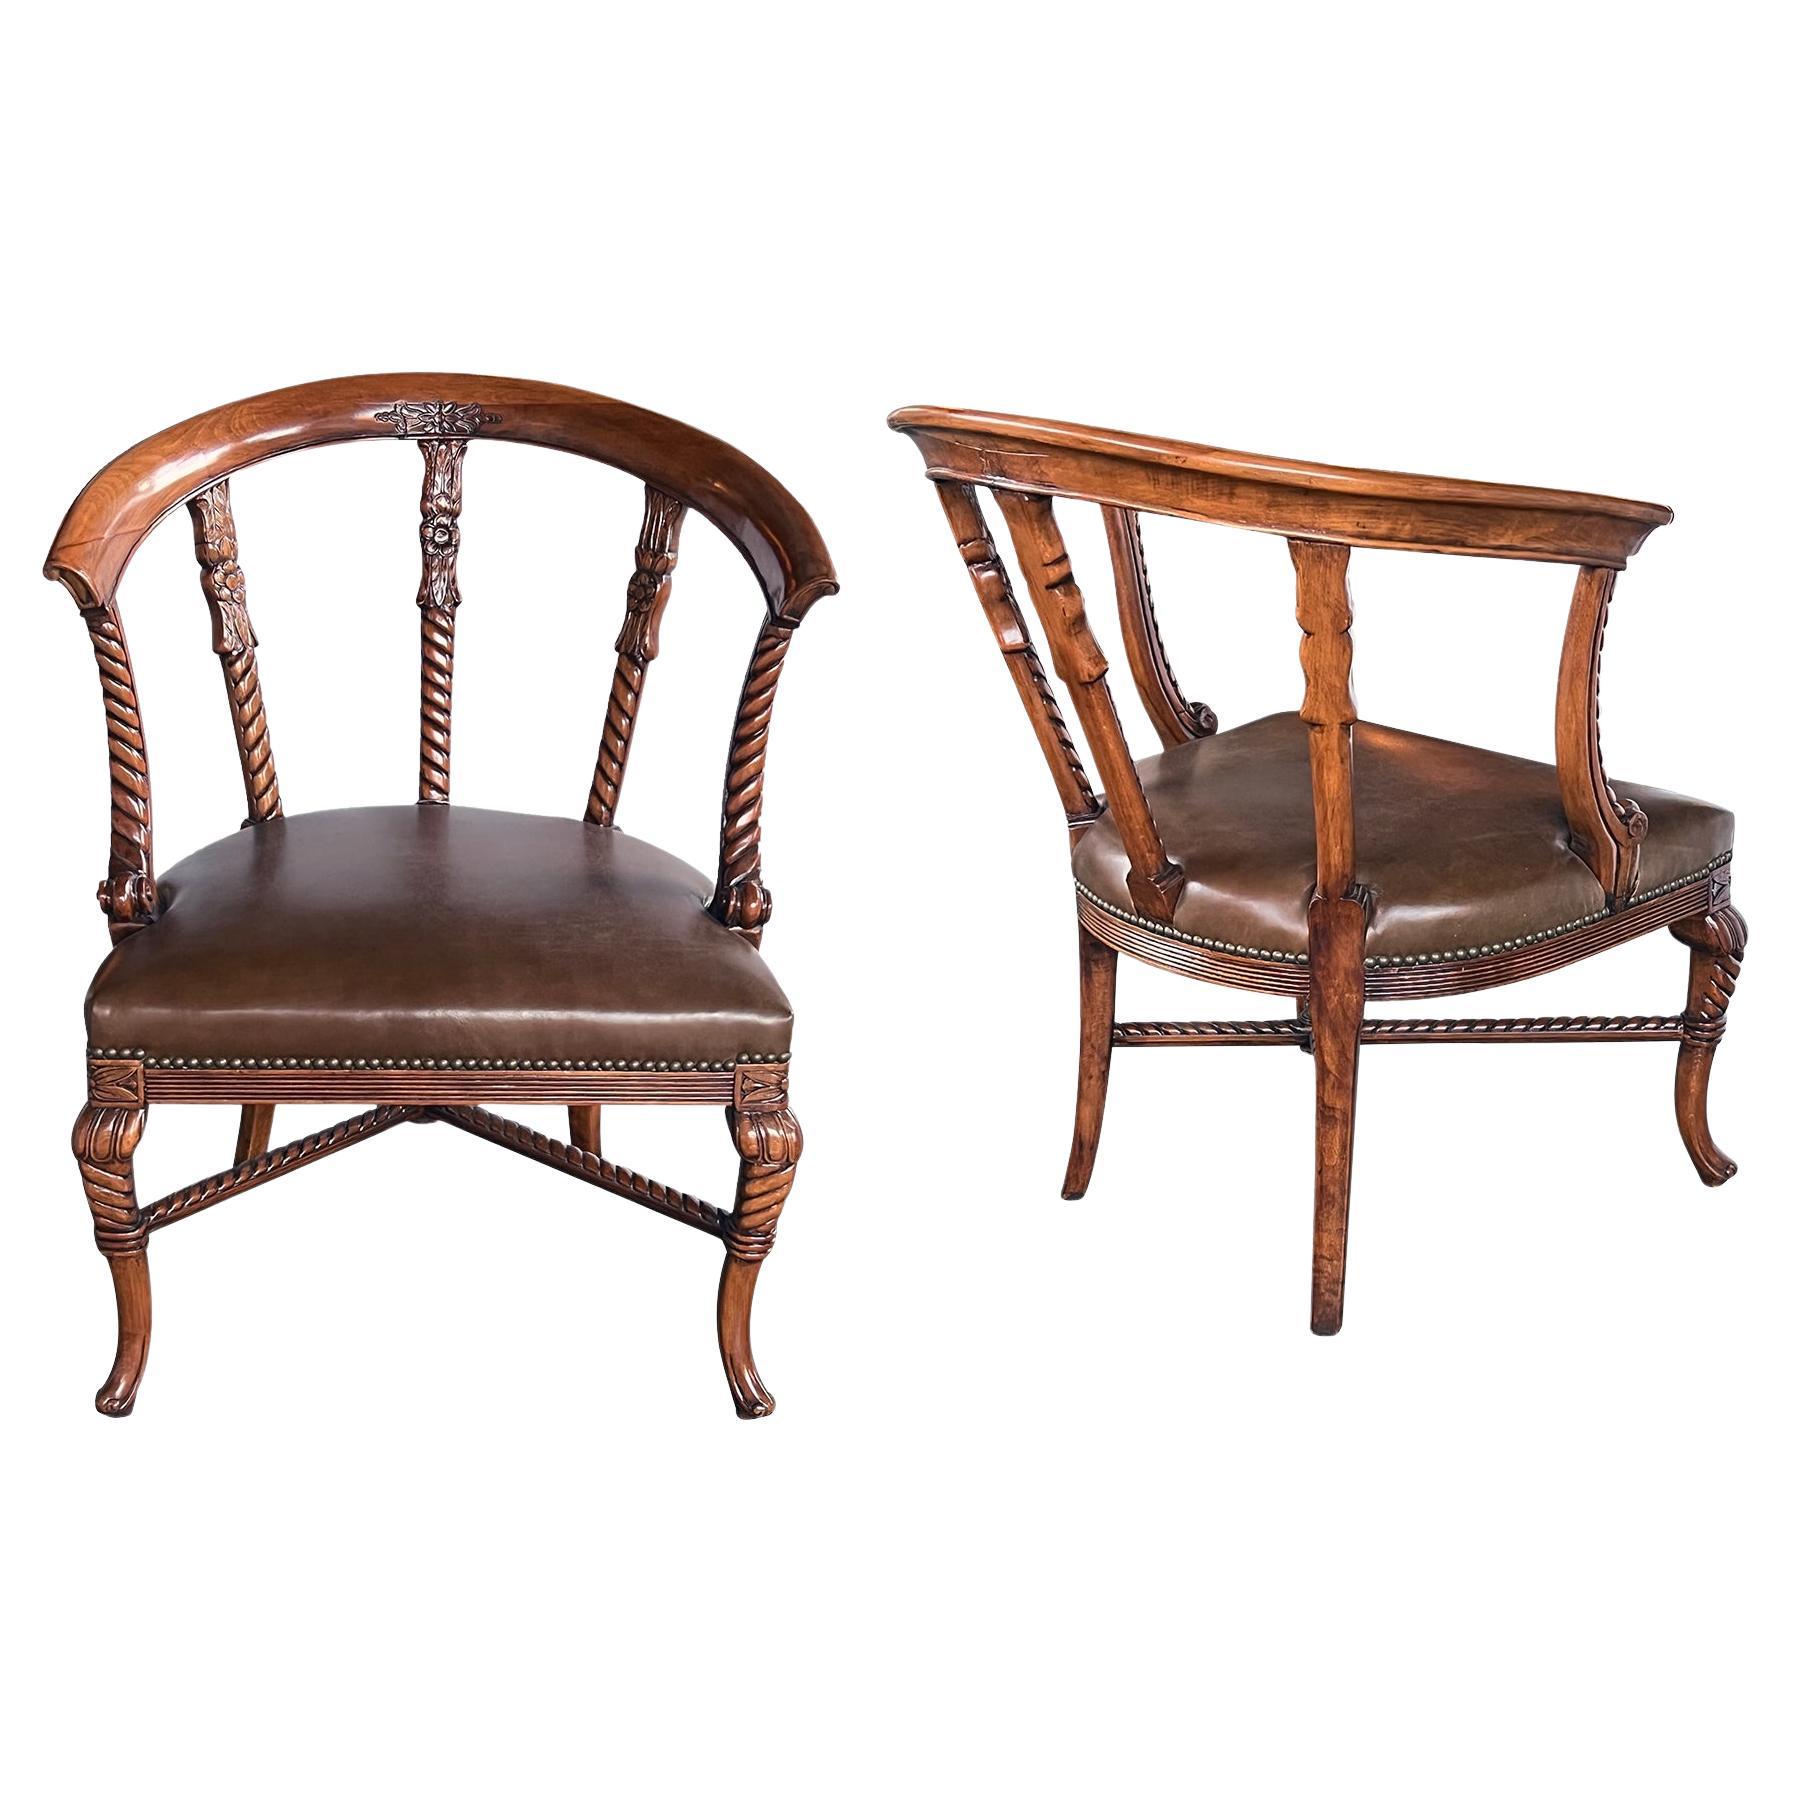 Pair of Antique Italian Open Barrel-Back Armchairs with Leather Seats For Sale